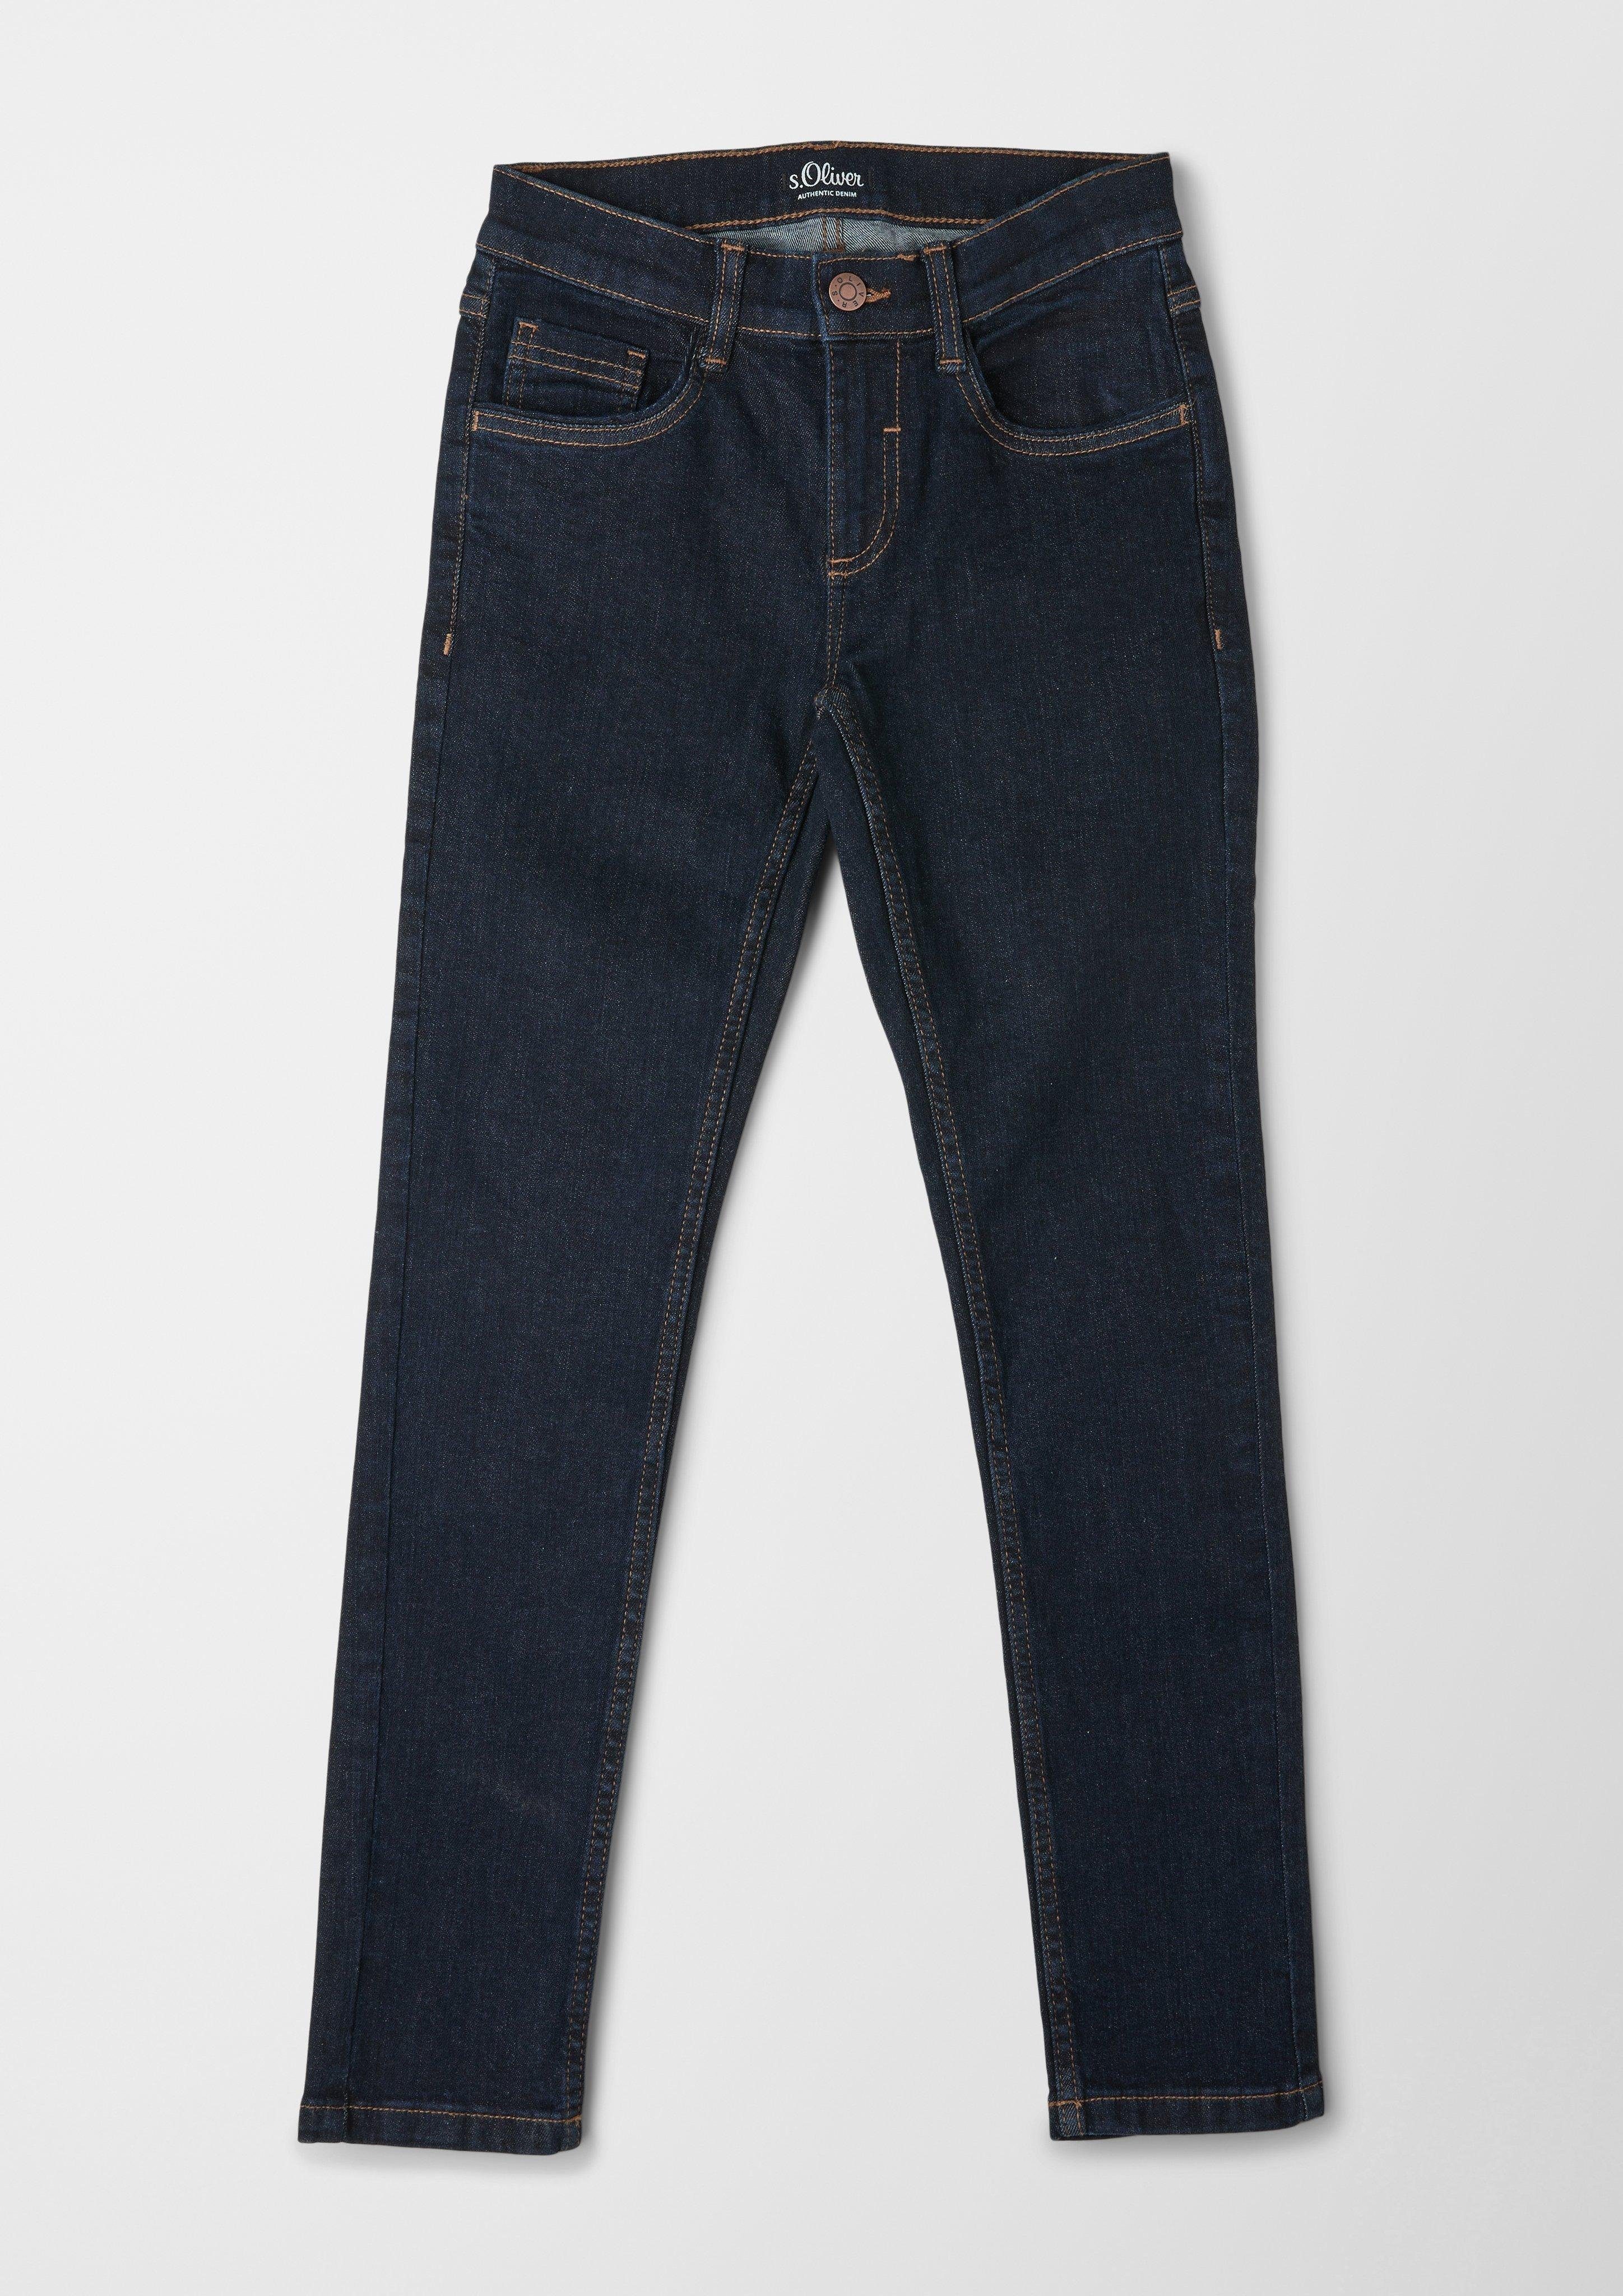 Mid Fit Seattle Rise Waschung Jeans Leg / Skinny / / Skinny 5-Pocket-Jeans Slim s.Oliver